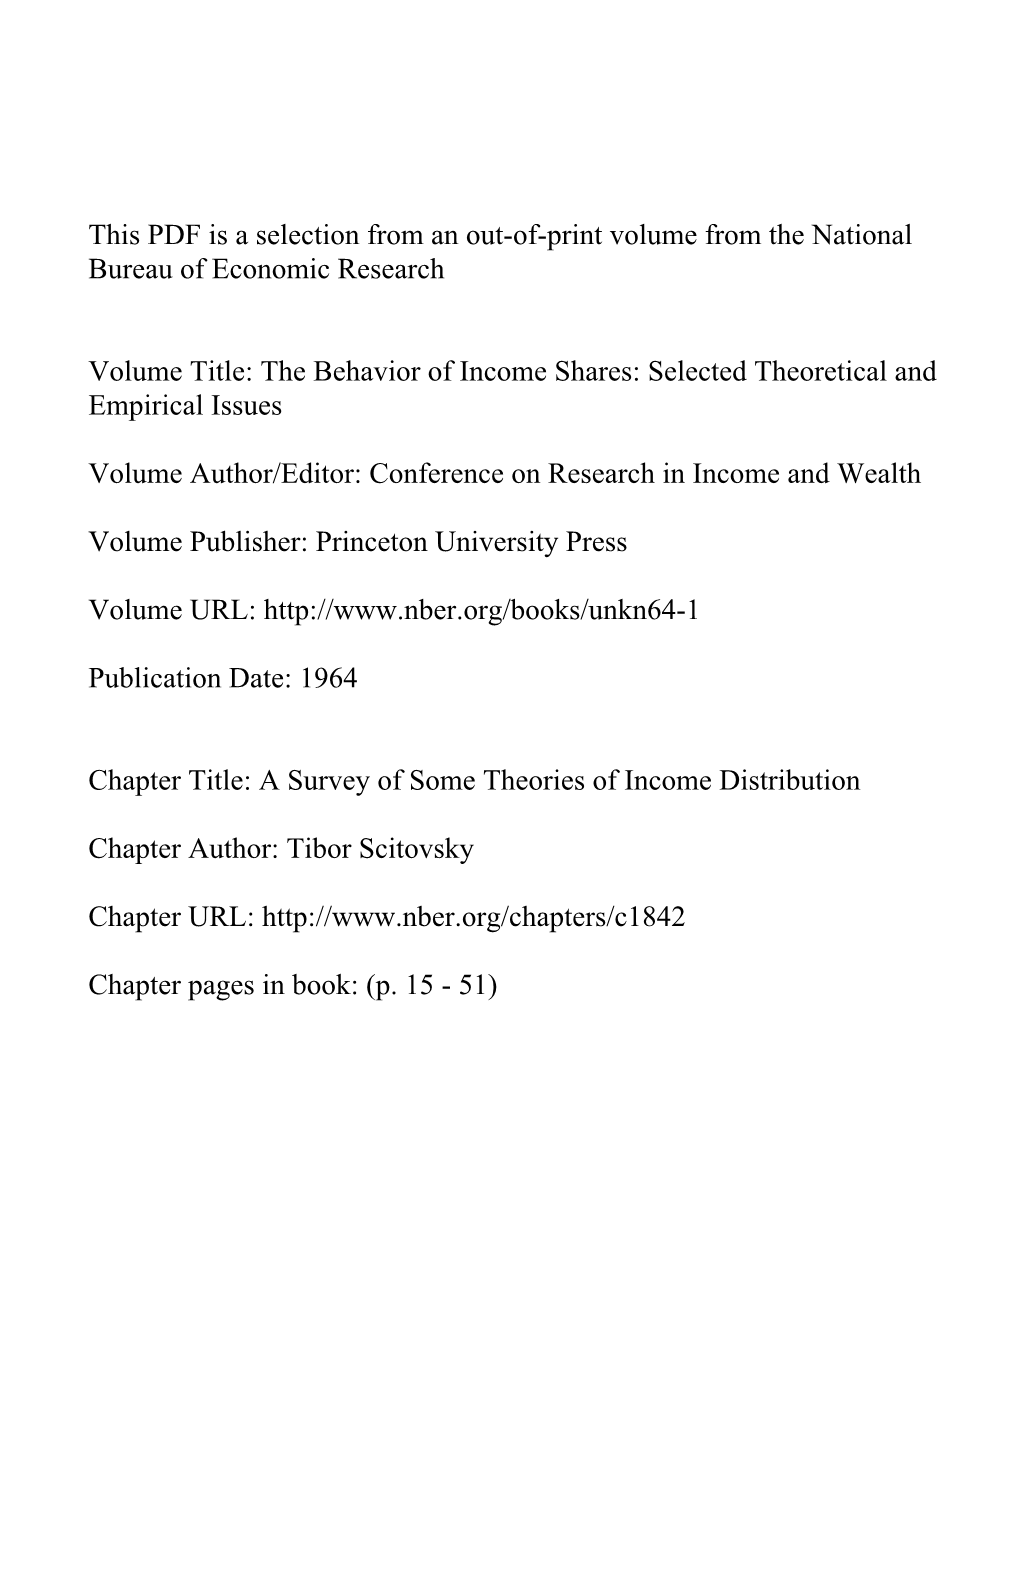 A Survey of Some Theories of Income Distribution